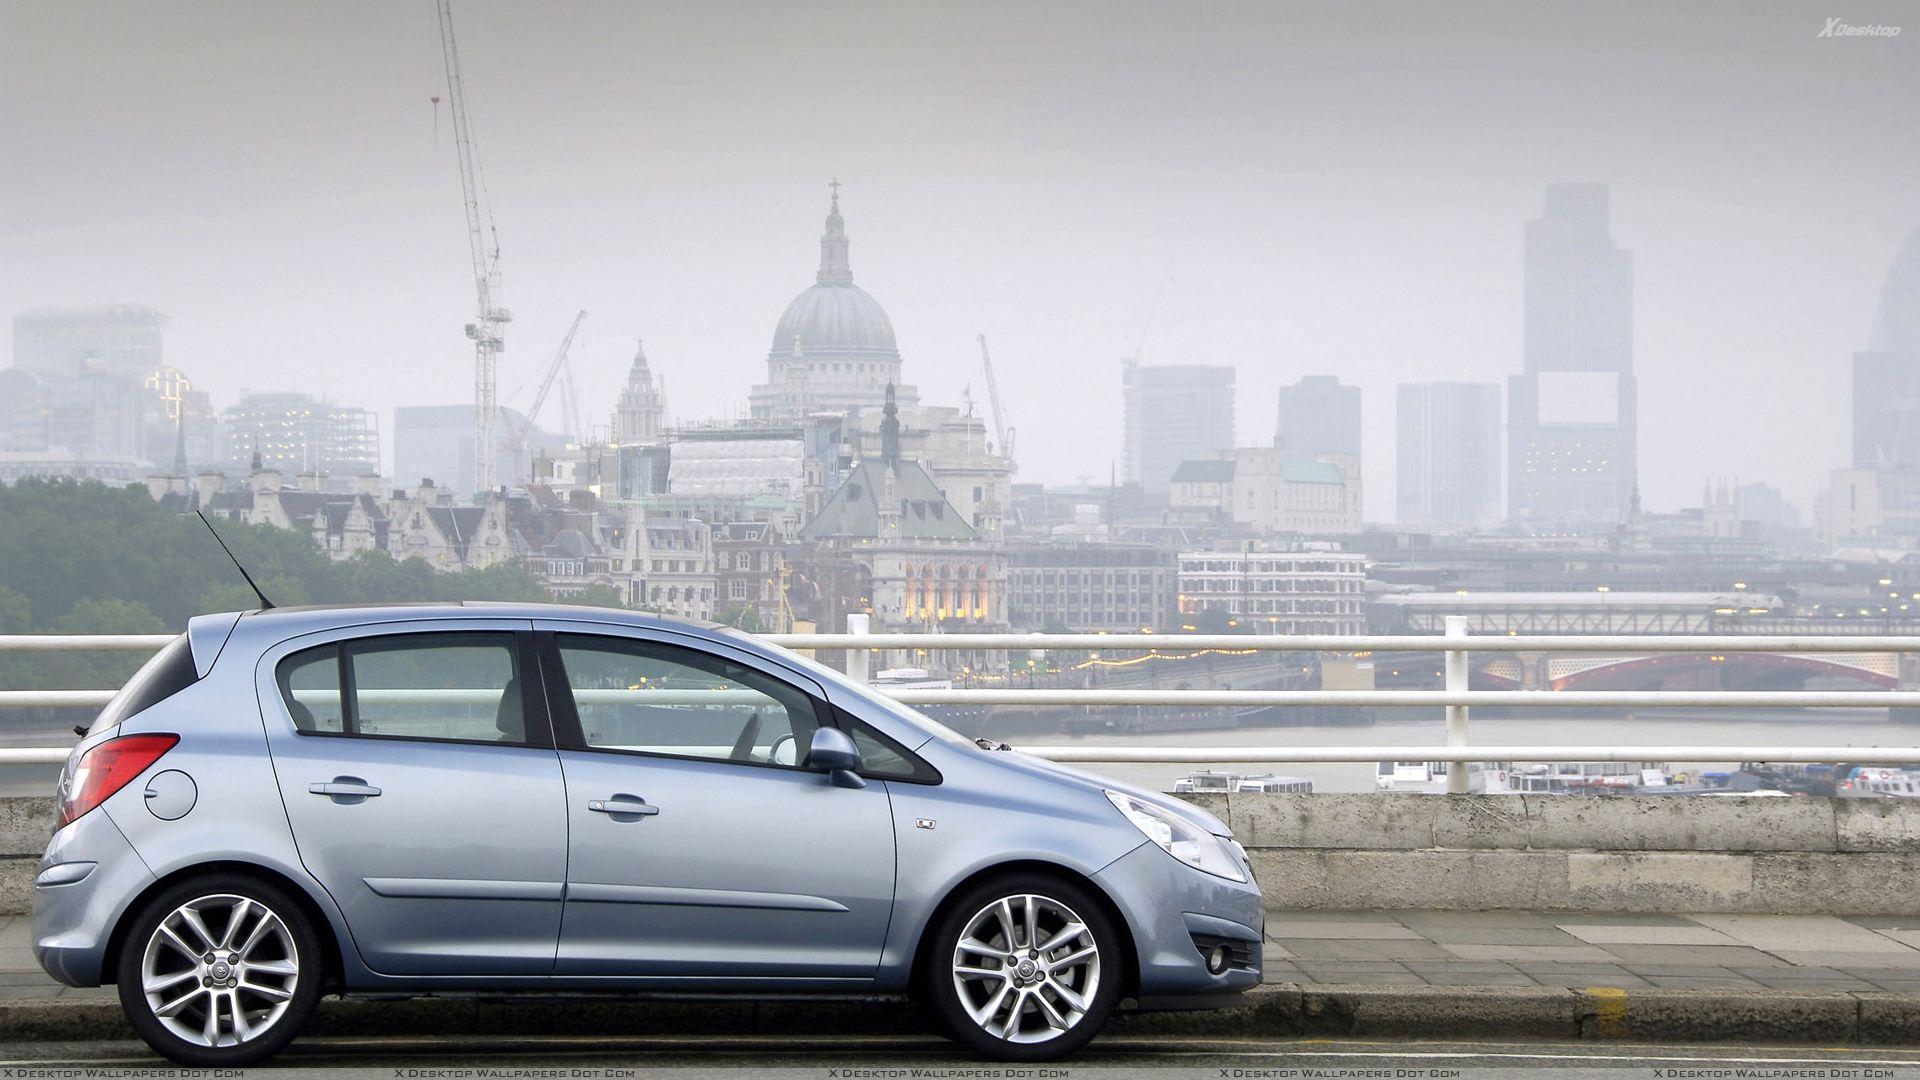 Vauxhall Corsa Side Pose In Blue Near Buildings Wallpaper